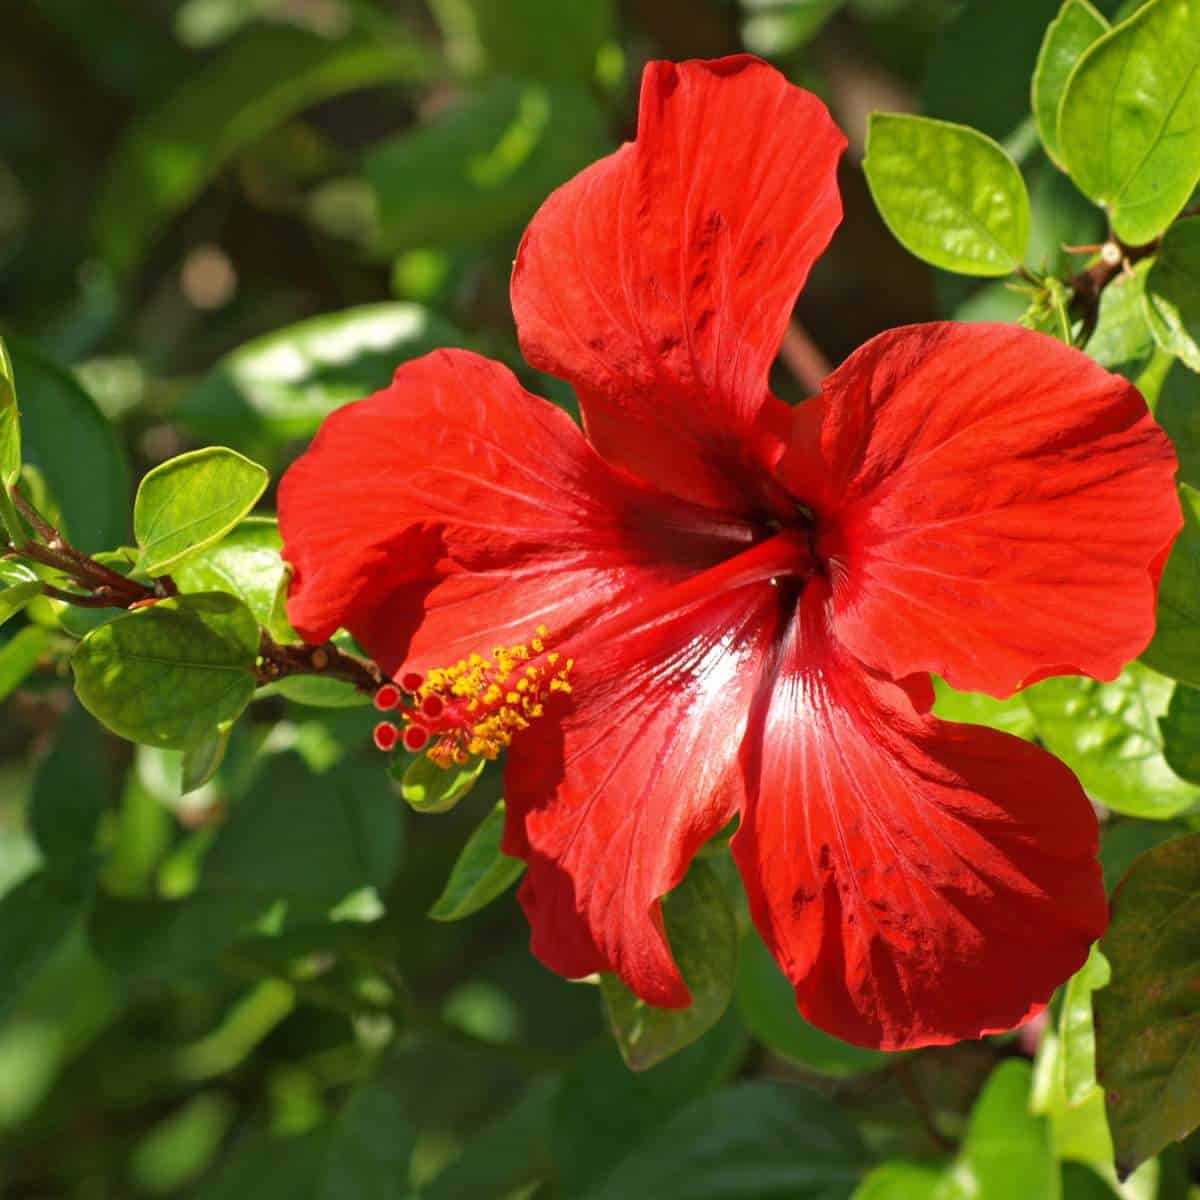 A vibrant red hibiscus flower with green leaves, showcasing one of the many types of hibiscus.